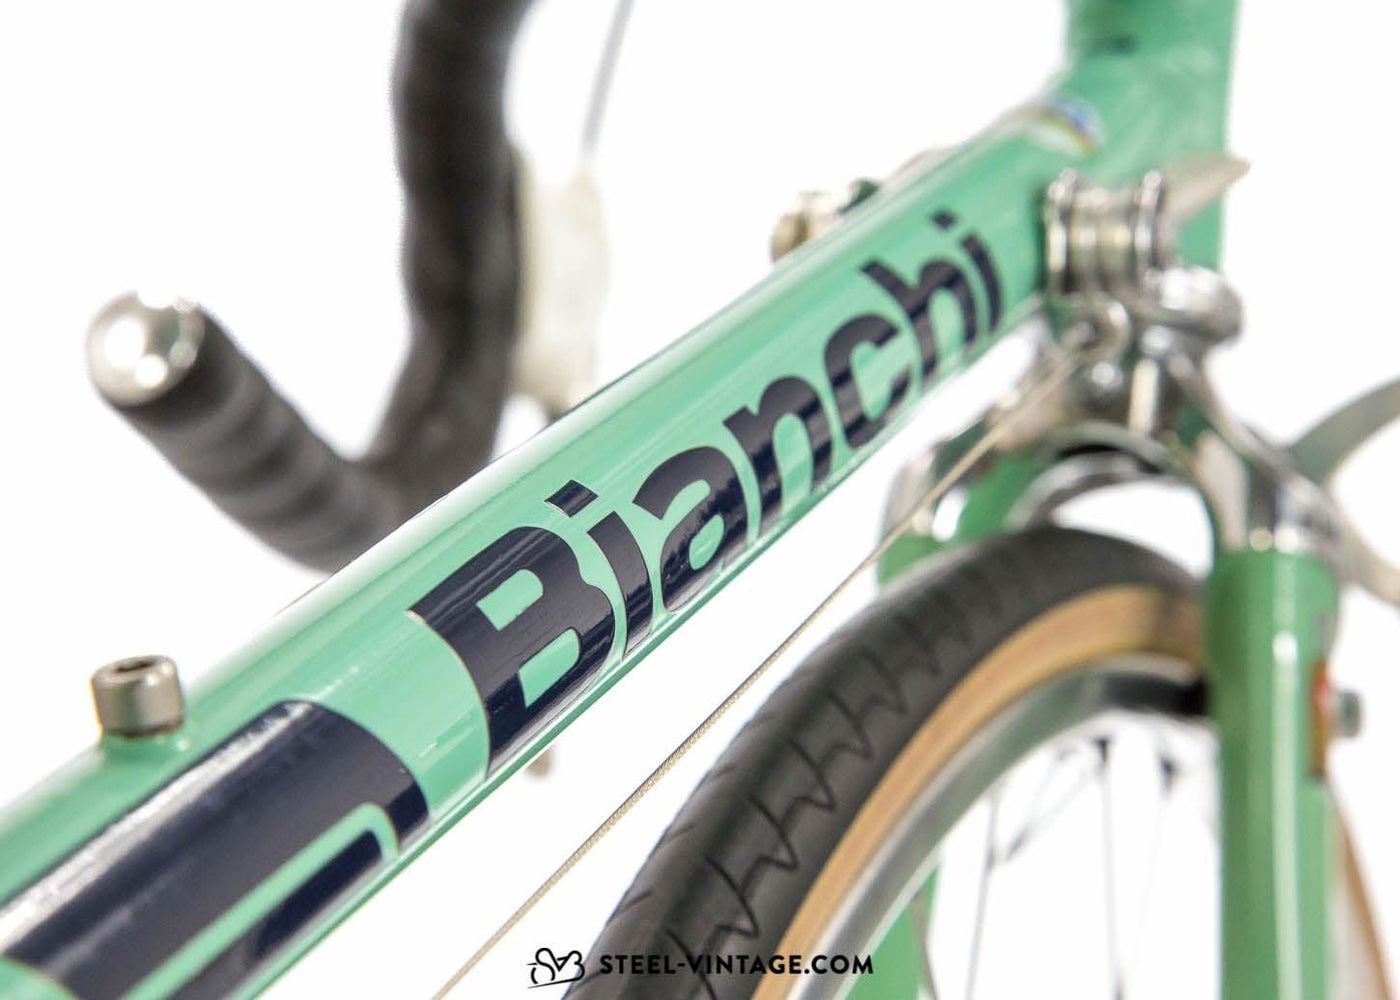 Bianchi High-End Small Classic Road Bike 1980s - Steel Vintage Bikes